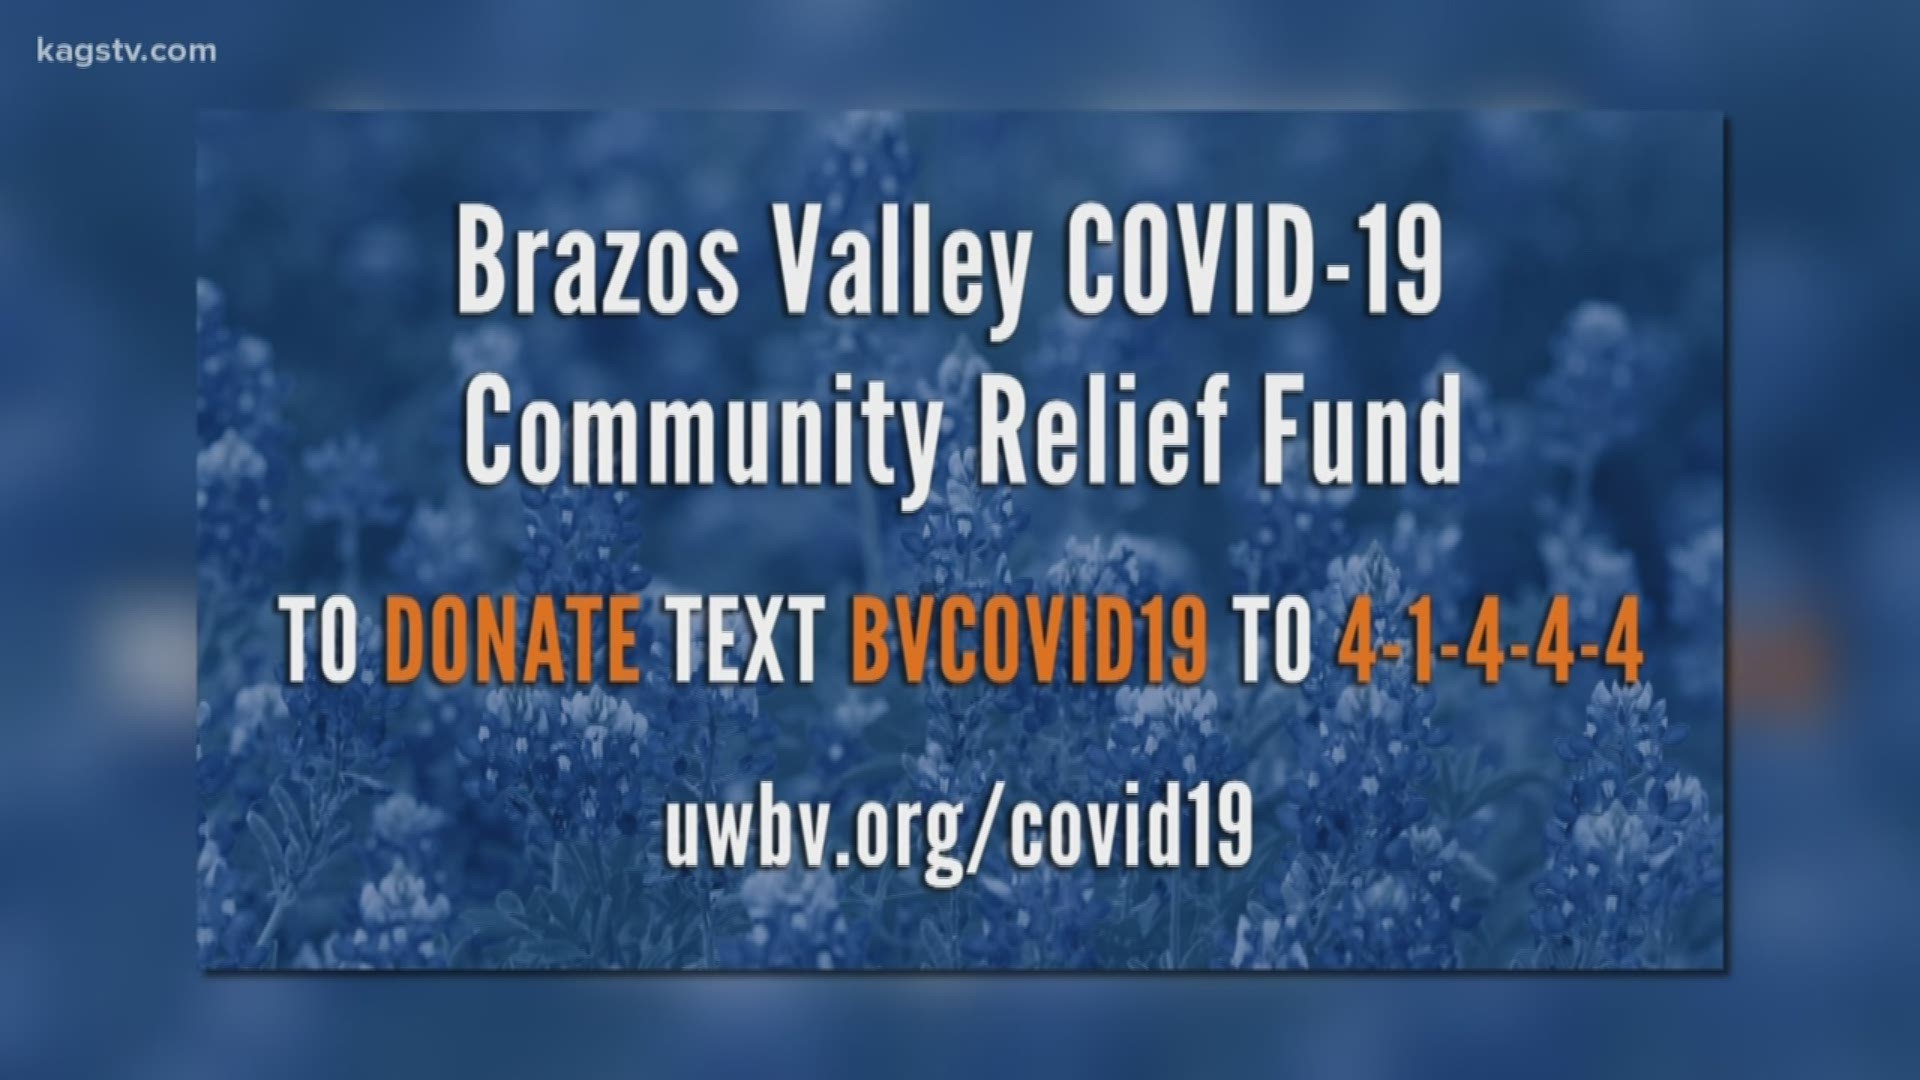 United Way of Brazos Valley will spearhead relief fund for those affected by Coronavirus.